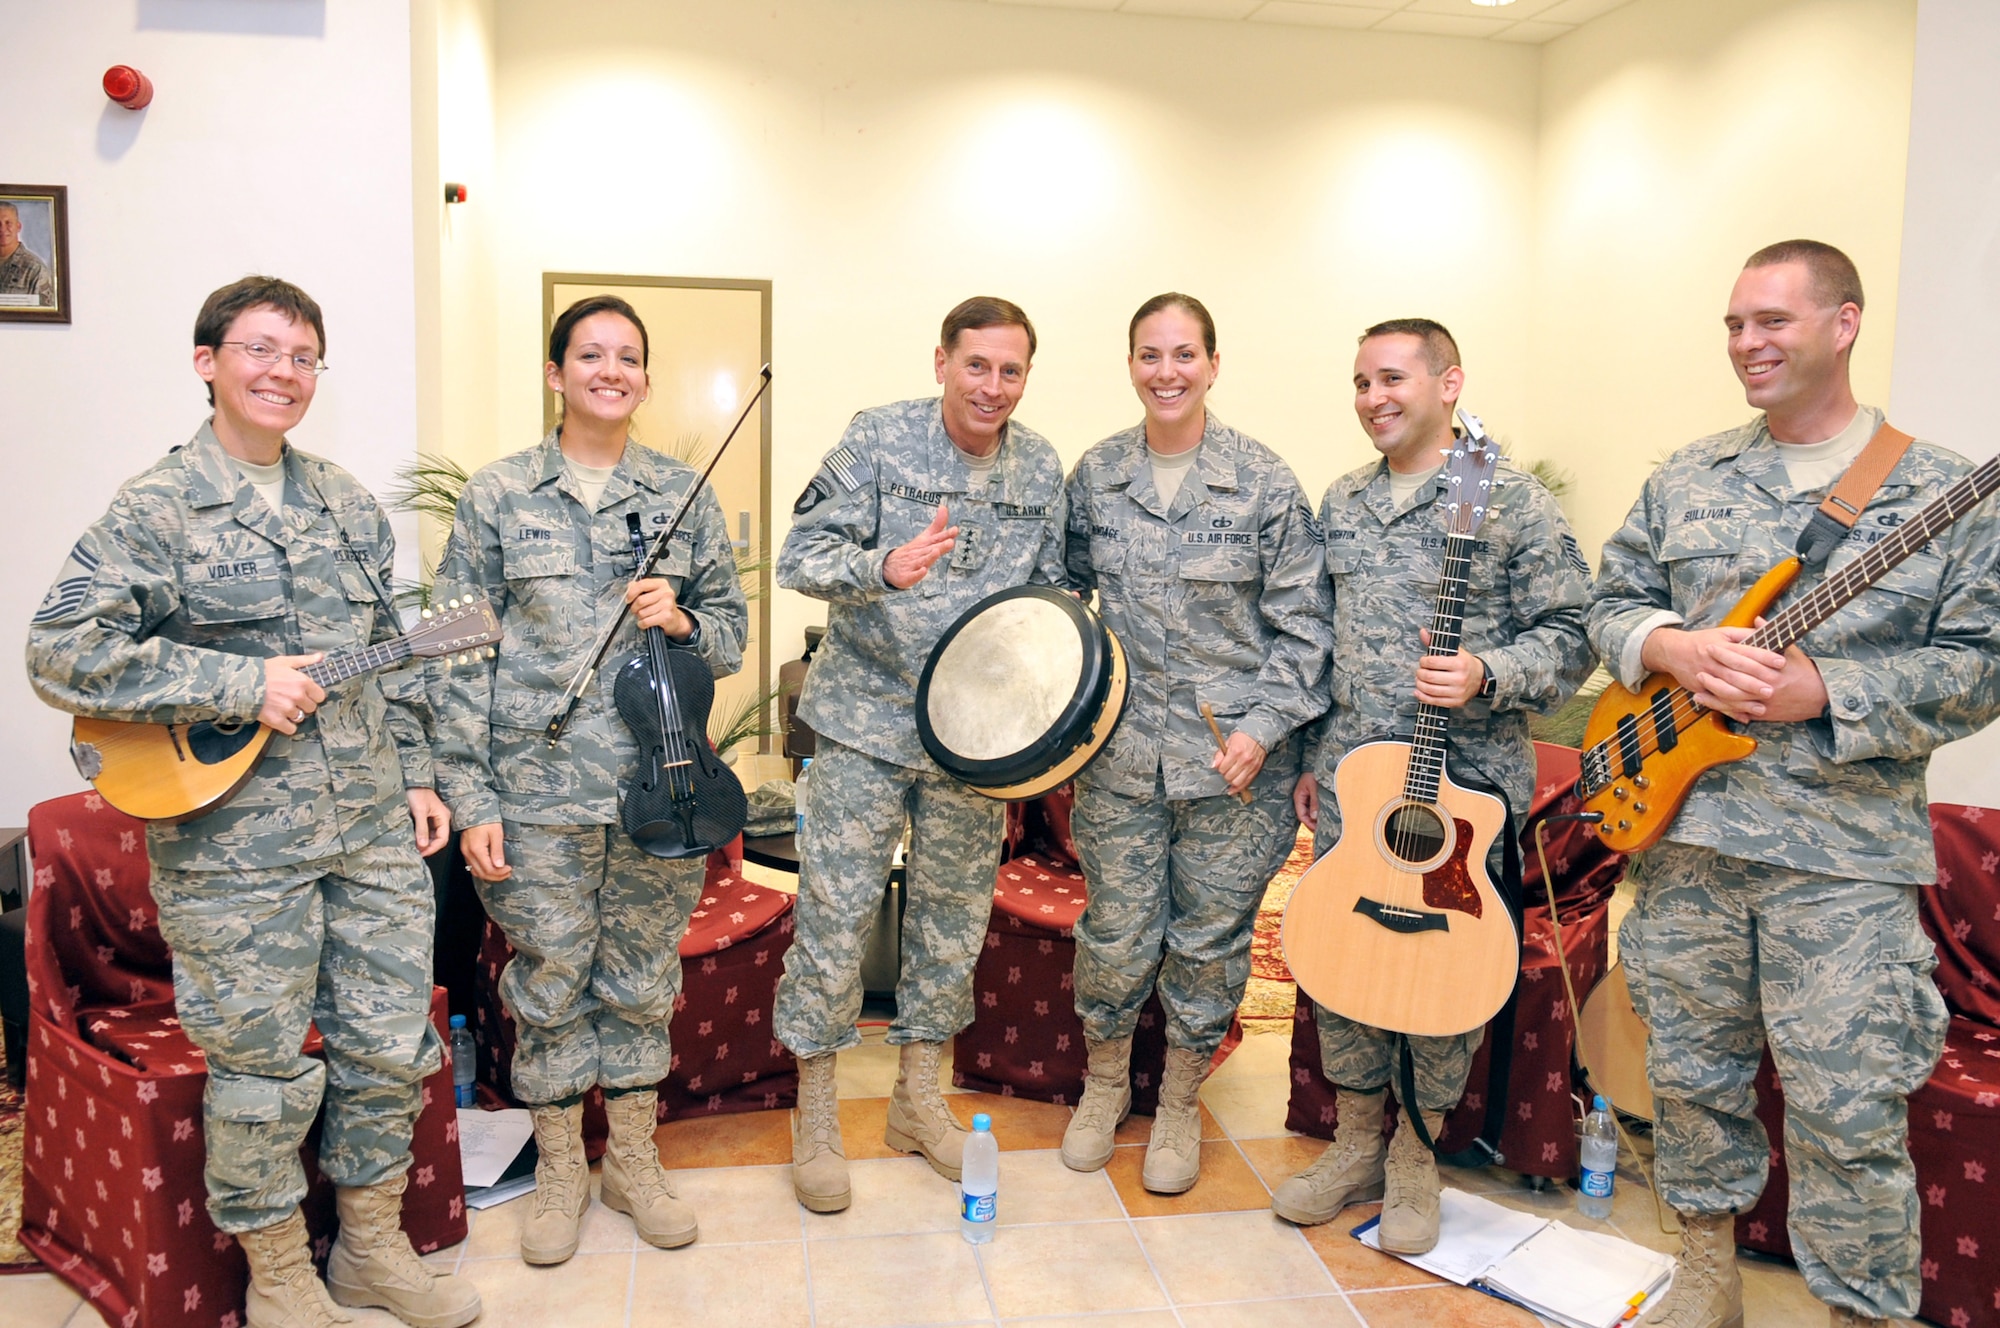 General David Petraeus, Commander of the U.S. Central Command, gets a music lesson from the members of Celtic Aire.  Members of Celtic Aire include (left to right) Senior Master Sgt. Deb Volker, Technical Sgts. Emily Lewis, Julia Brundage and Joe Haughton, and Master Sgt. Eric Sullivan.  The ensemble was deployed to Central and Southwest Asia to perform for joint forces, as well as in local communities, hospitals and schools. 